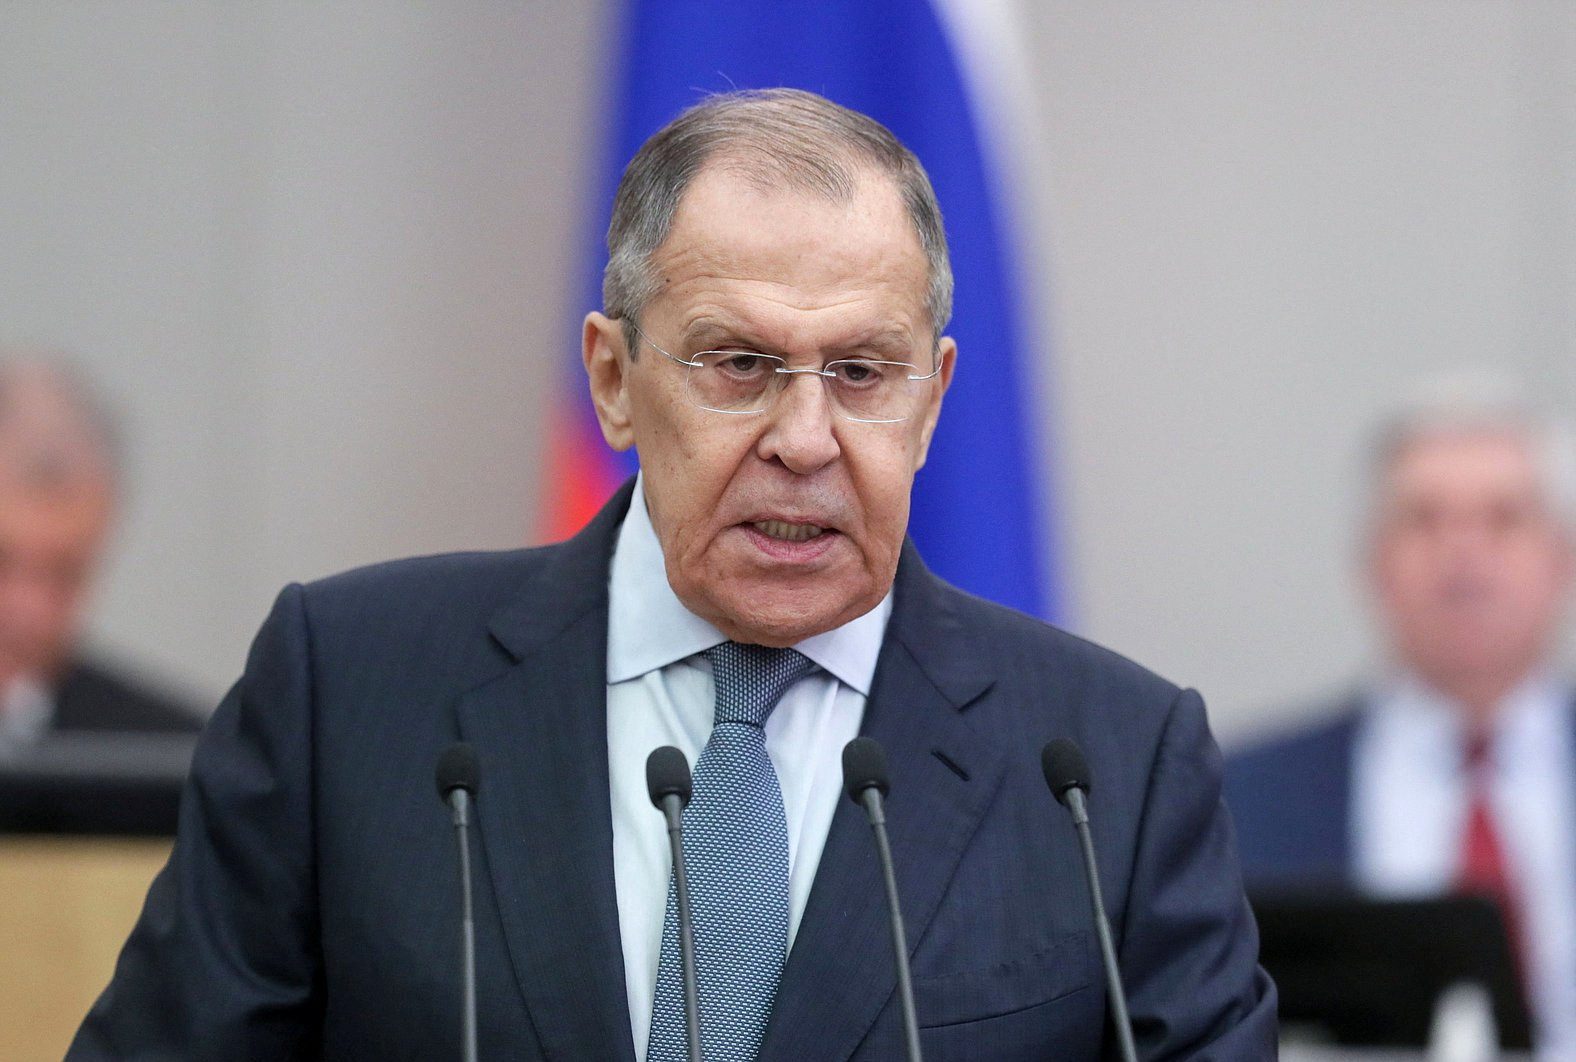 Lavrov says Russia open to talks with West, awaiting serious proposal